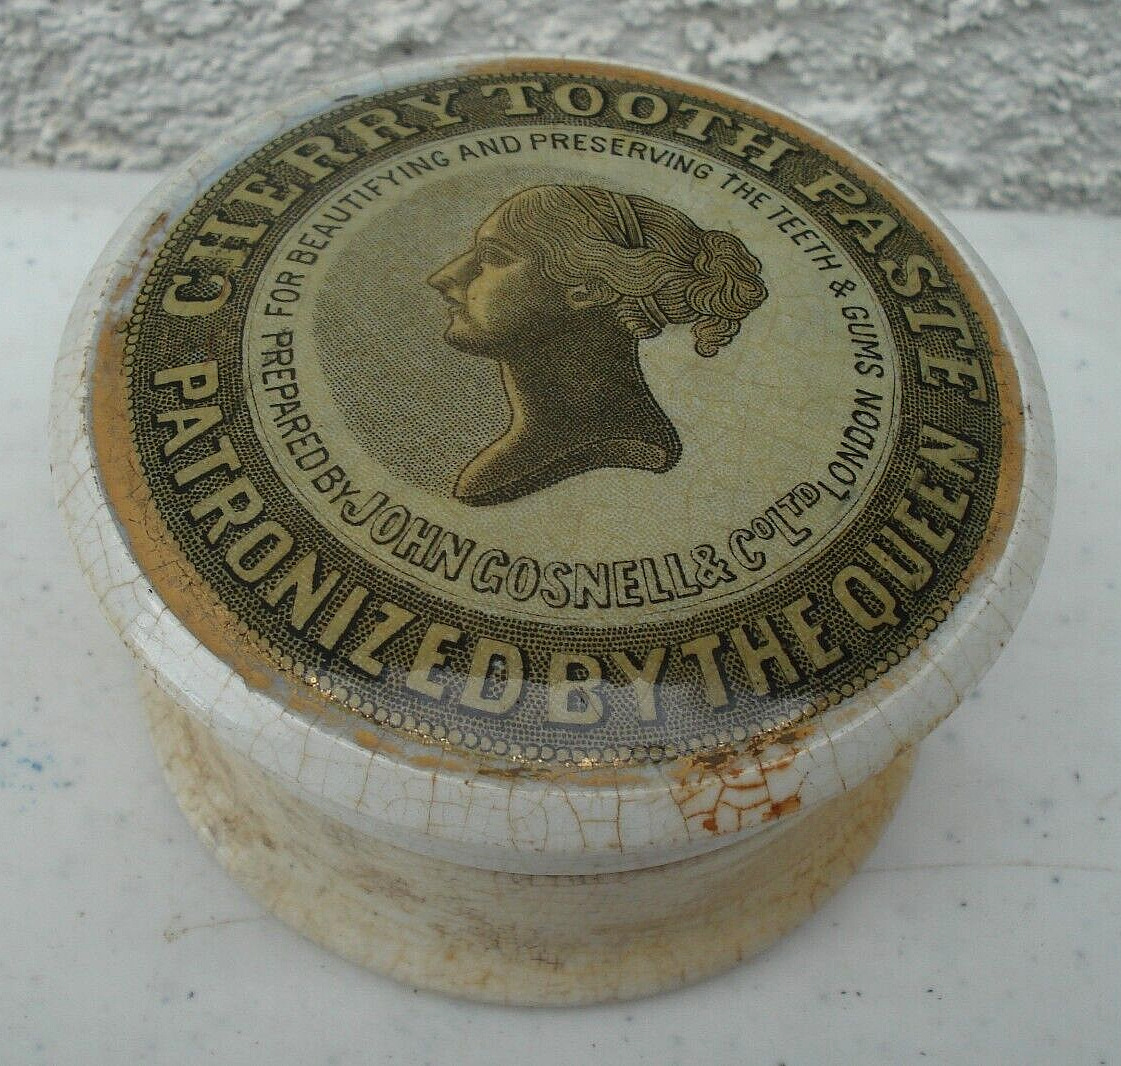 Antique, young Queen Victoria, John Gosnell Tooth Paste Jar pot lid